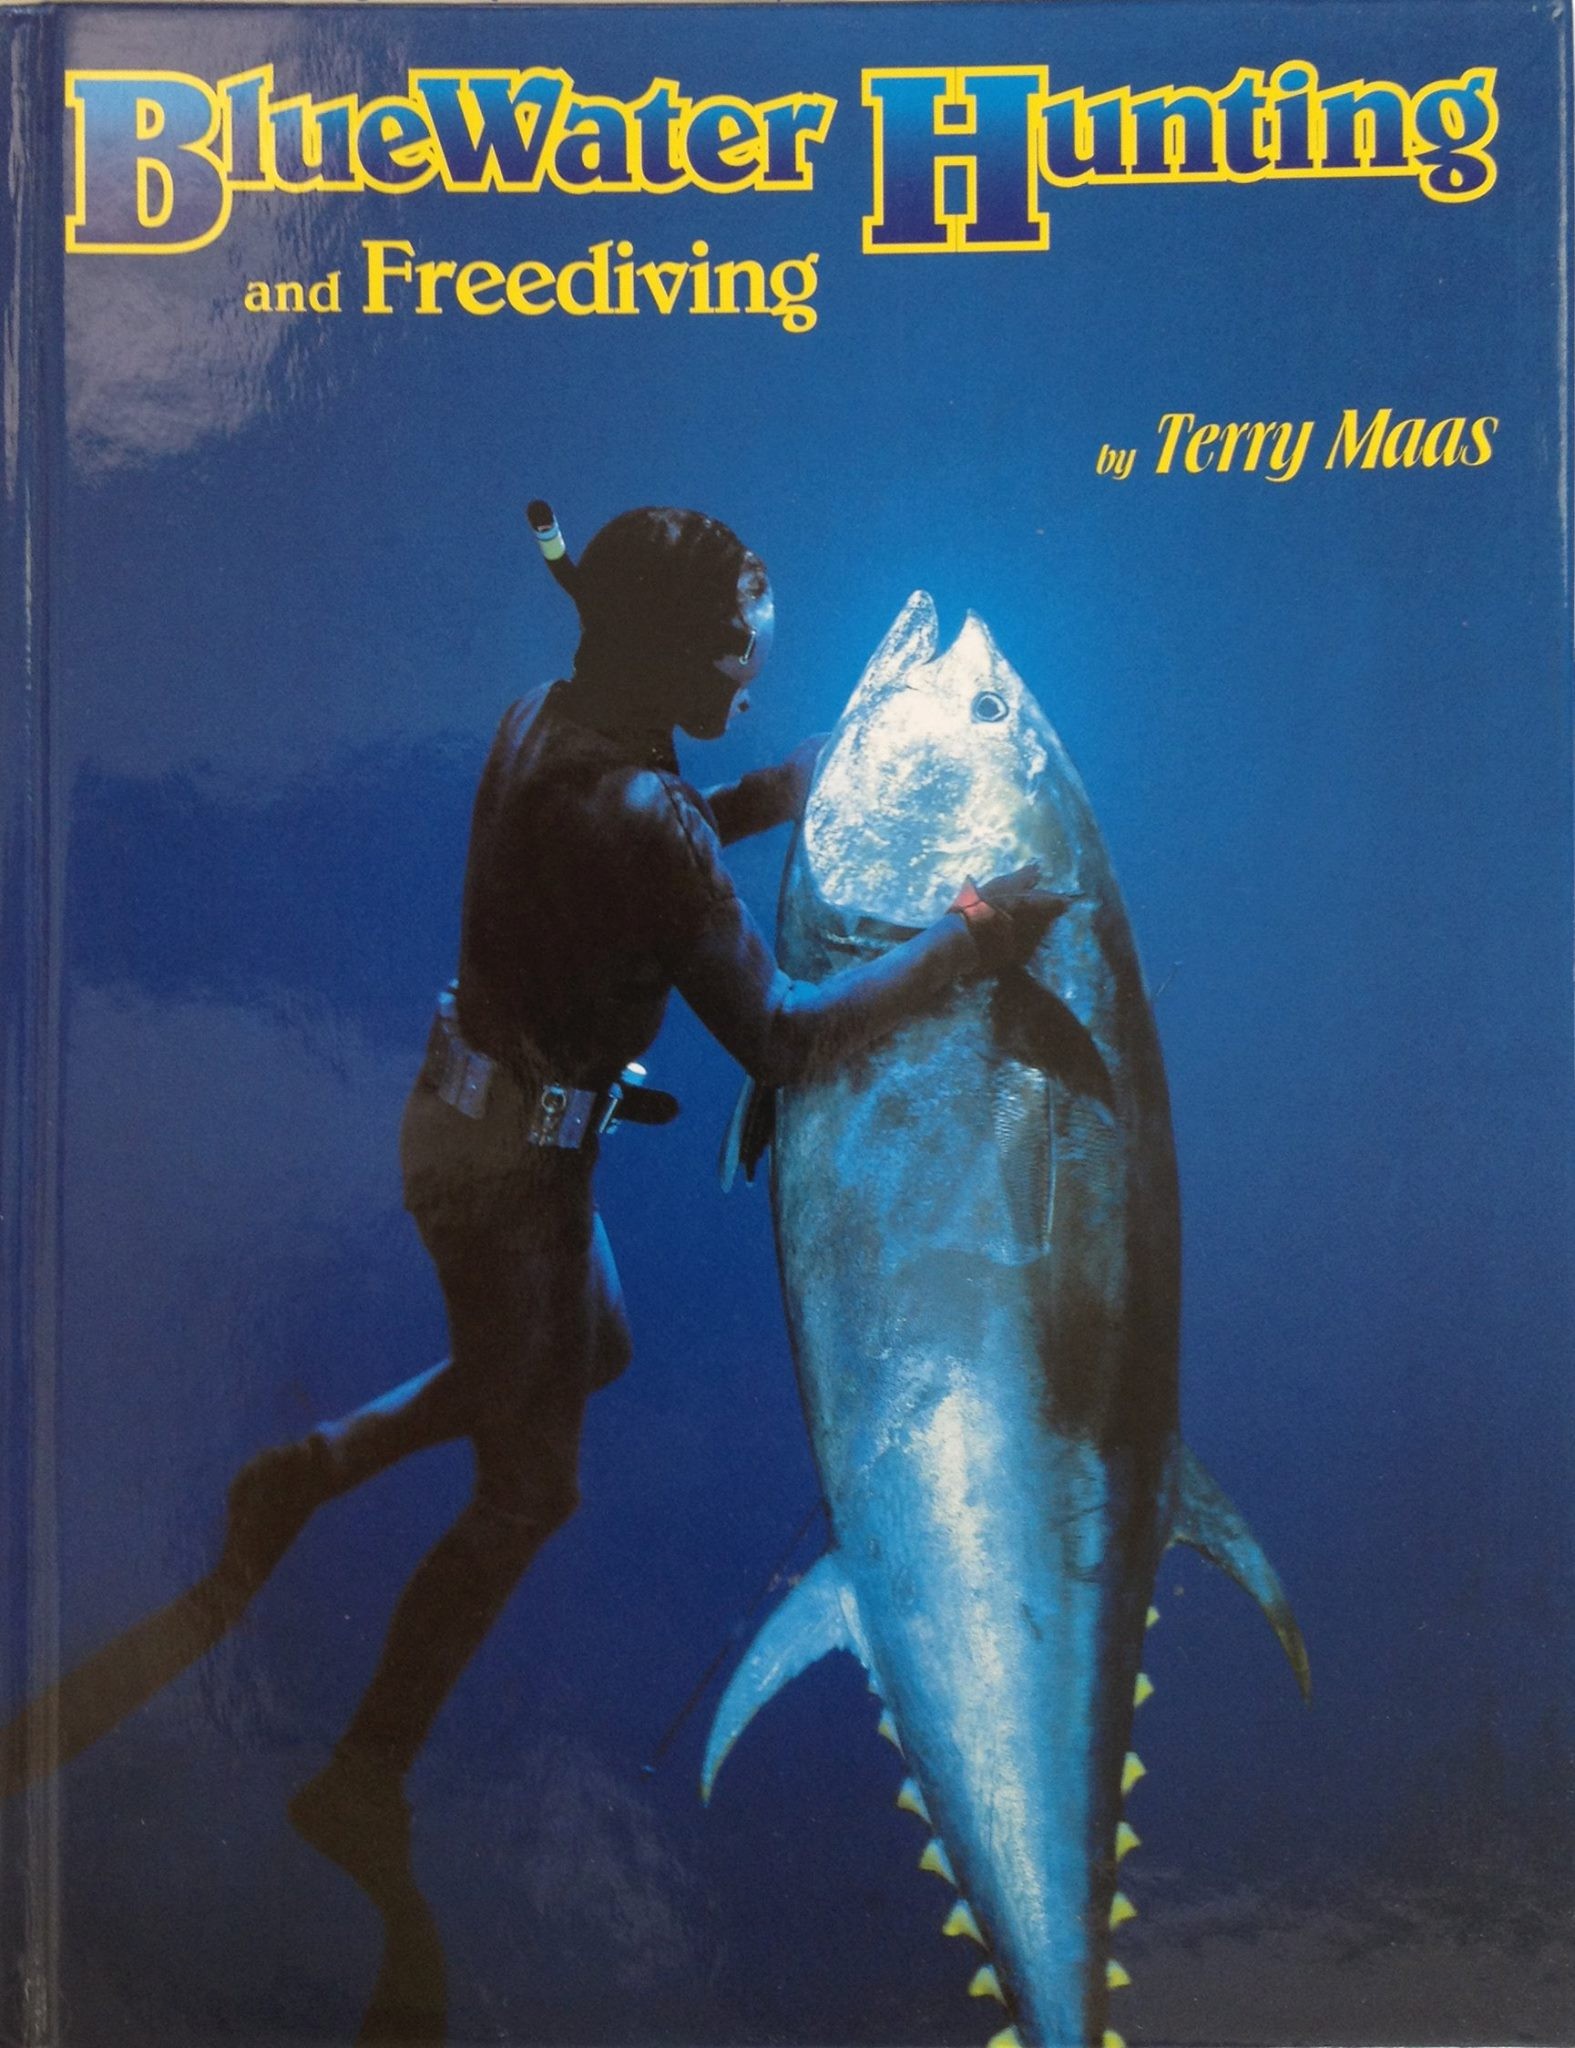 Terry Maas' BlueWater Hunting and Freediving now available in digital form.